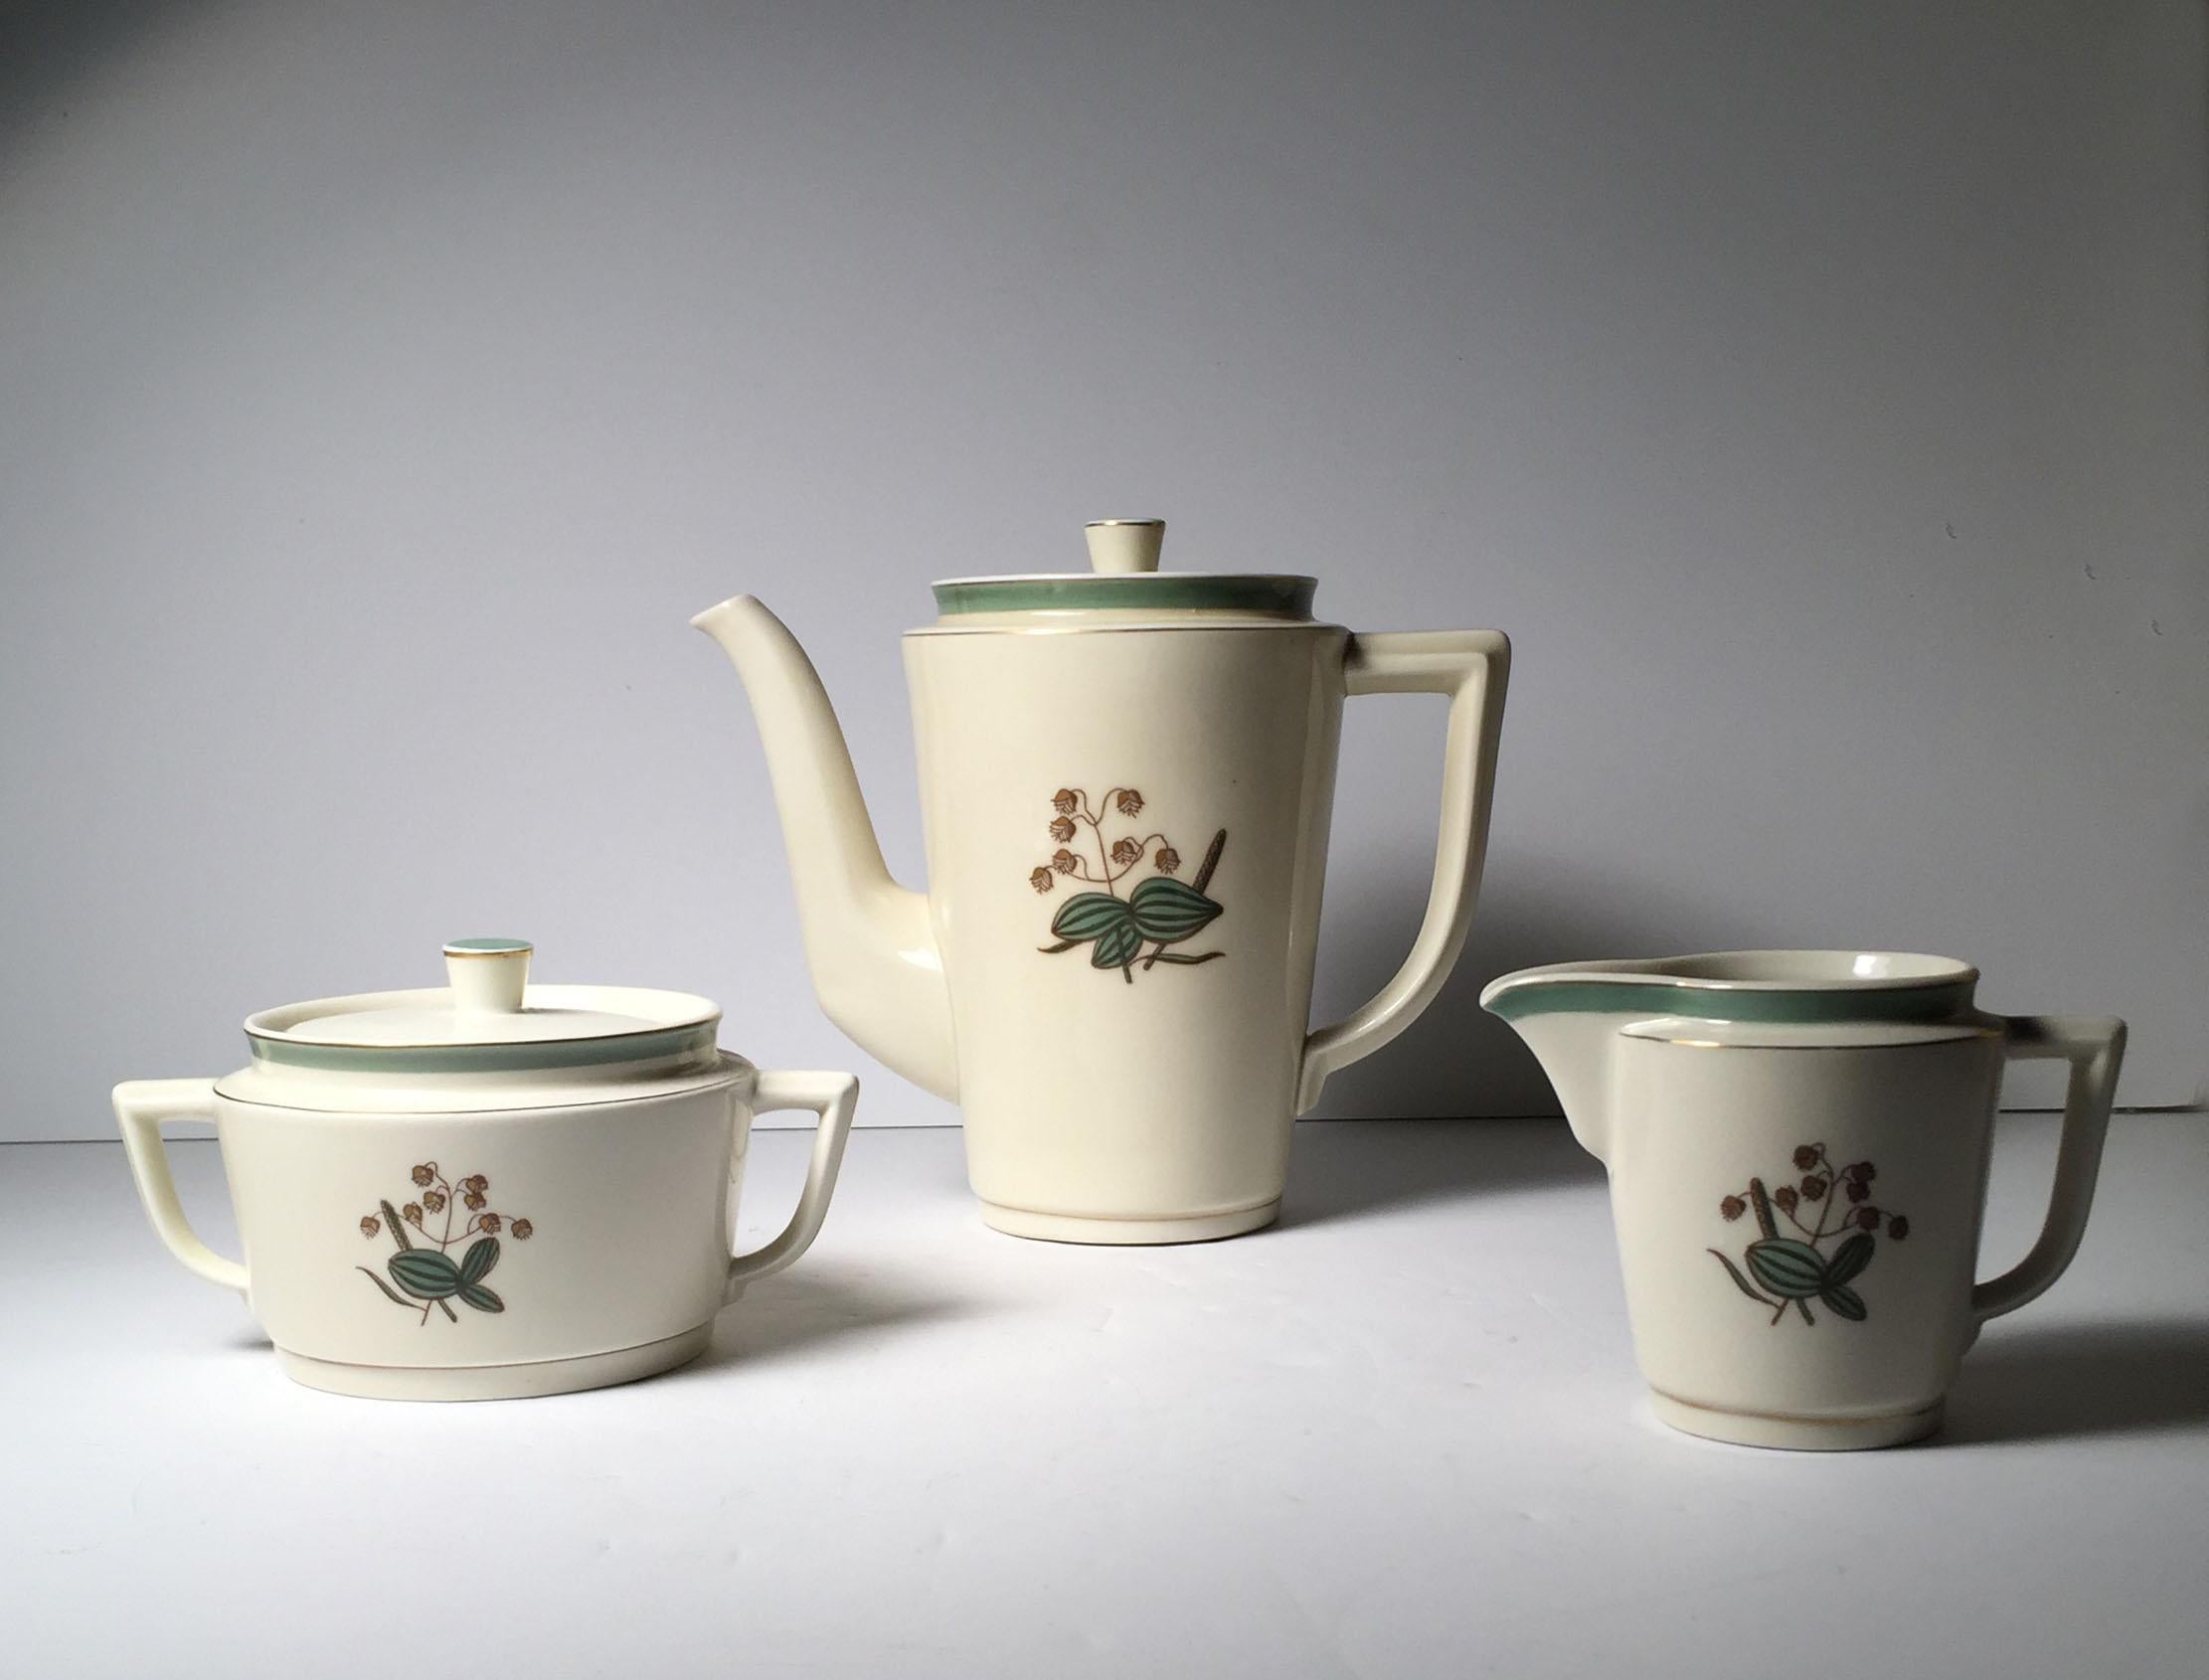 A fine vintage Danish porcelain set. Pieces Signed on underside. Service of eight with small cake plates. All with artistic decoration to the porcelain. Porcelain is a ivory color (has a warmth yellowish off-white color)

Coffee or teapot
Sugar